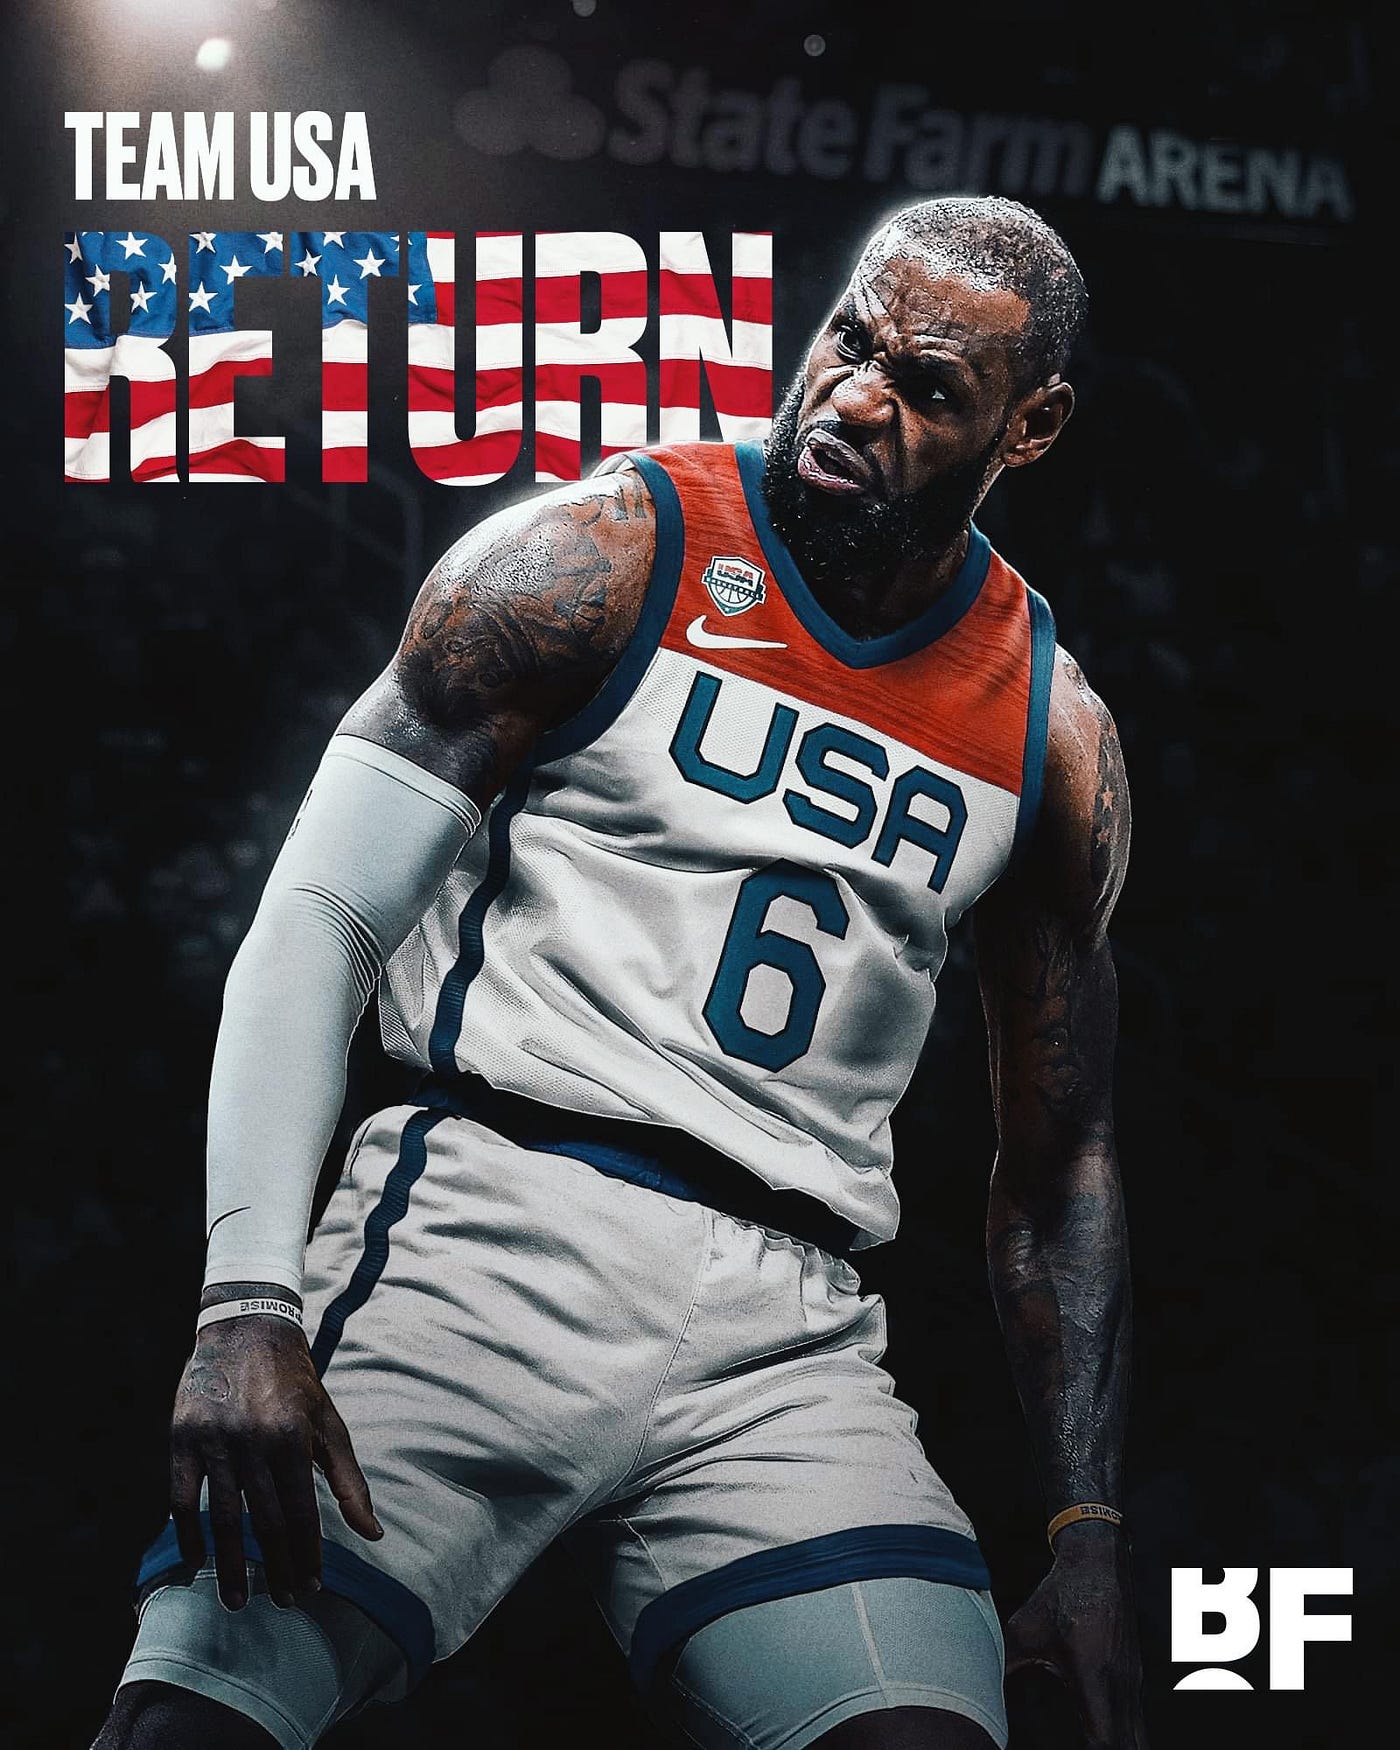 LeBron confirms Paris Olympics interest, but after that his future is  undecided - NBC Sports